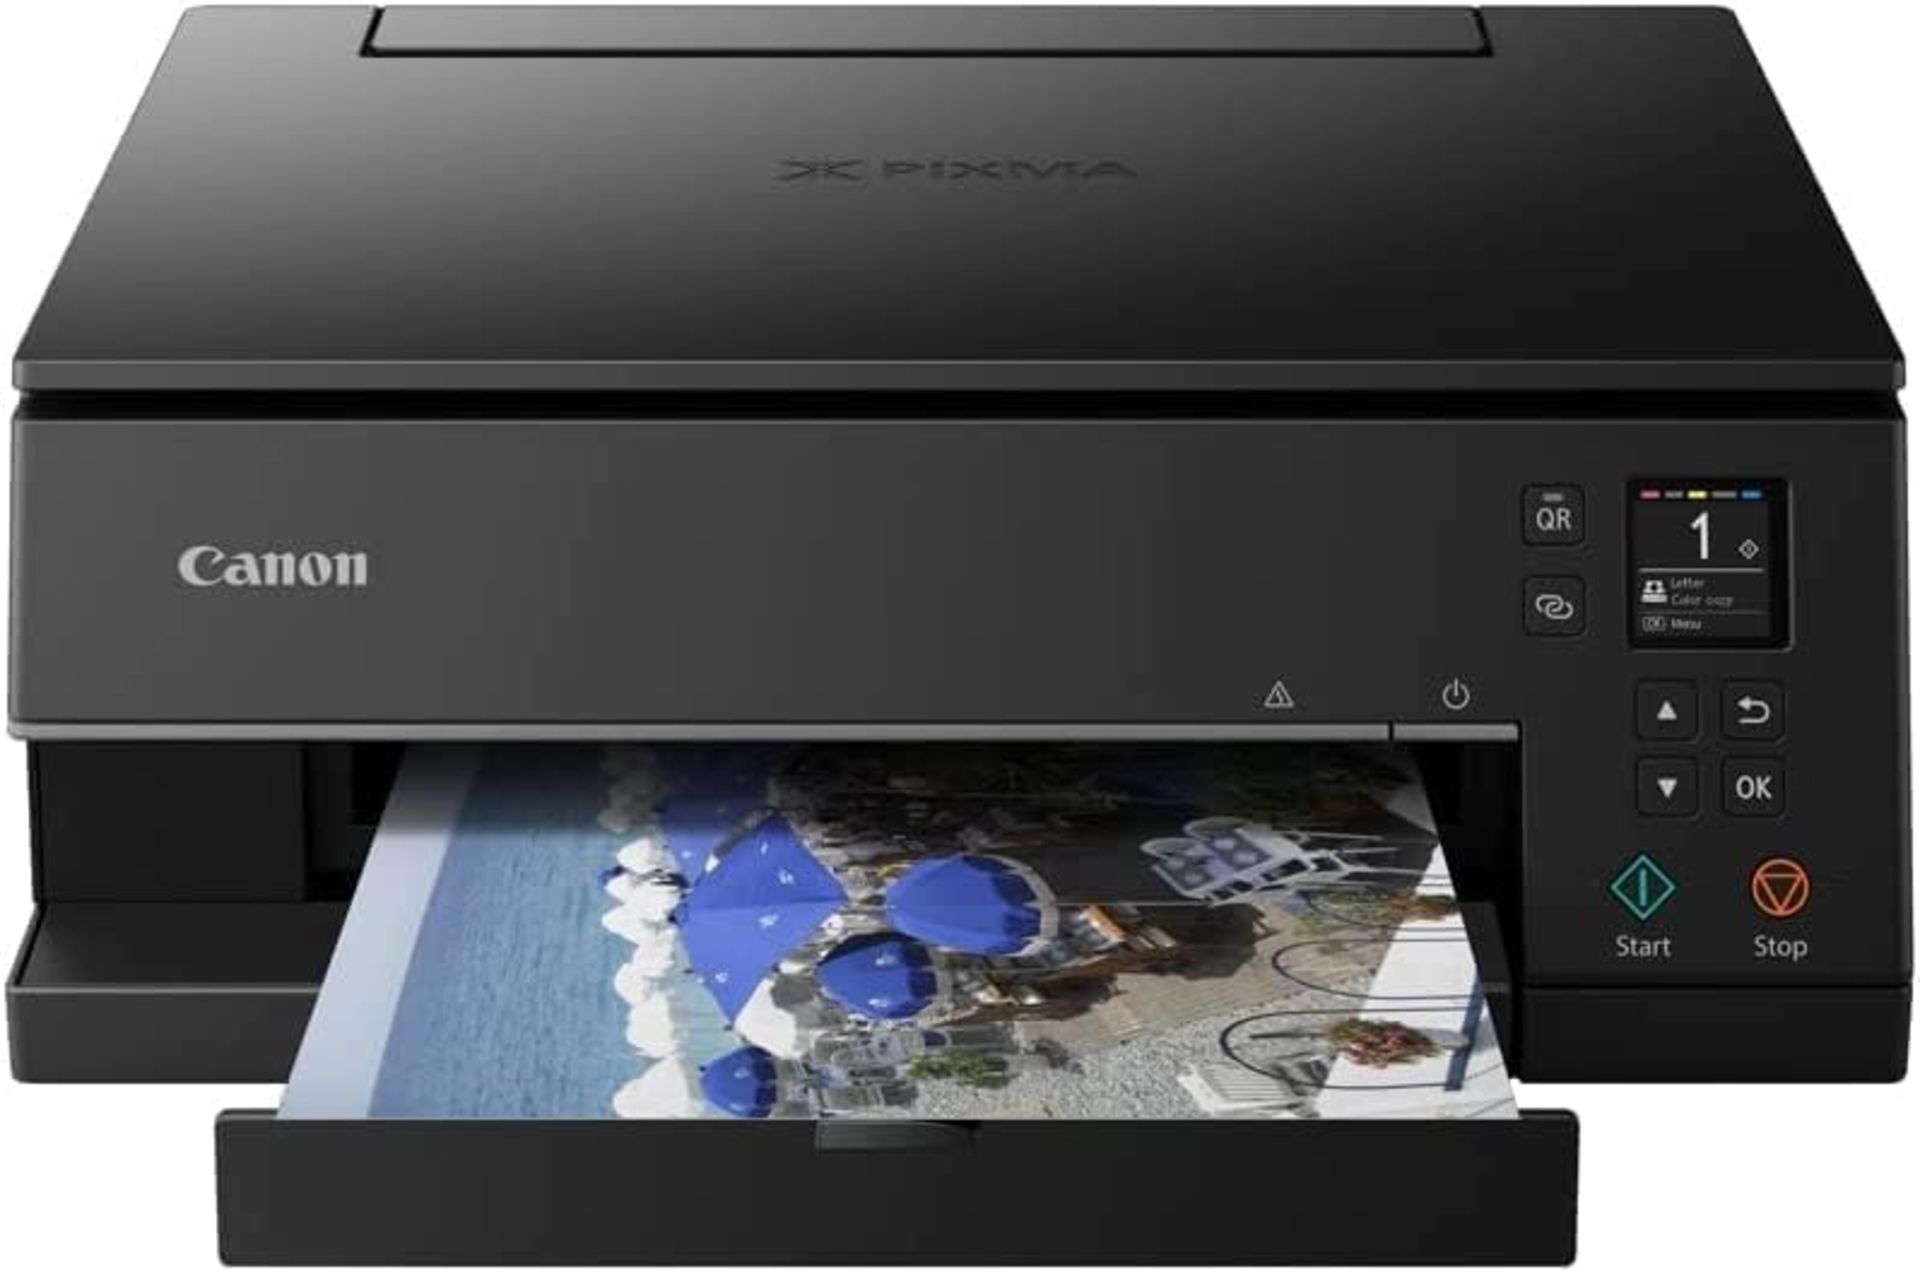 CANON Pixma TS6350a Wireless Colour All In One Inkjet Printer. RRP £129.99. (R6R). MODERN - Smart - Image 4 of 5